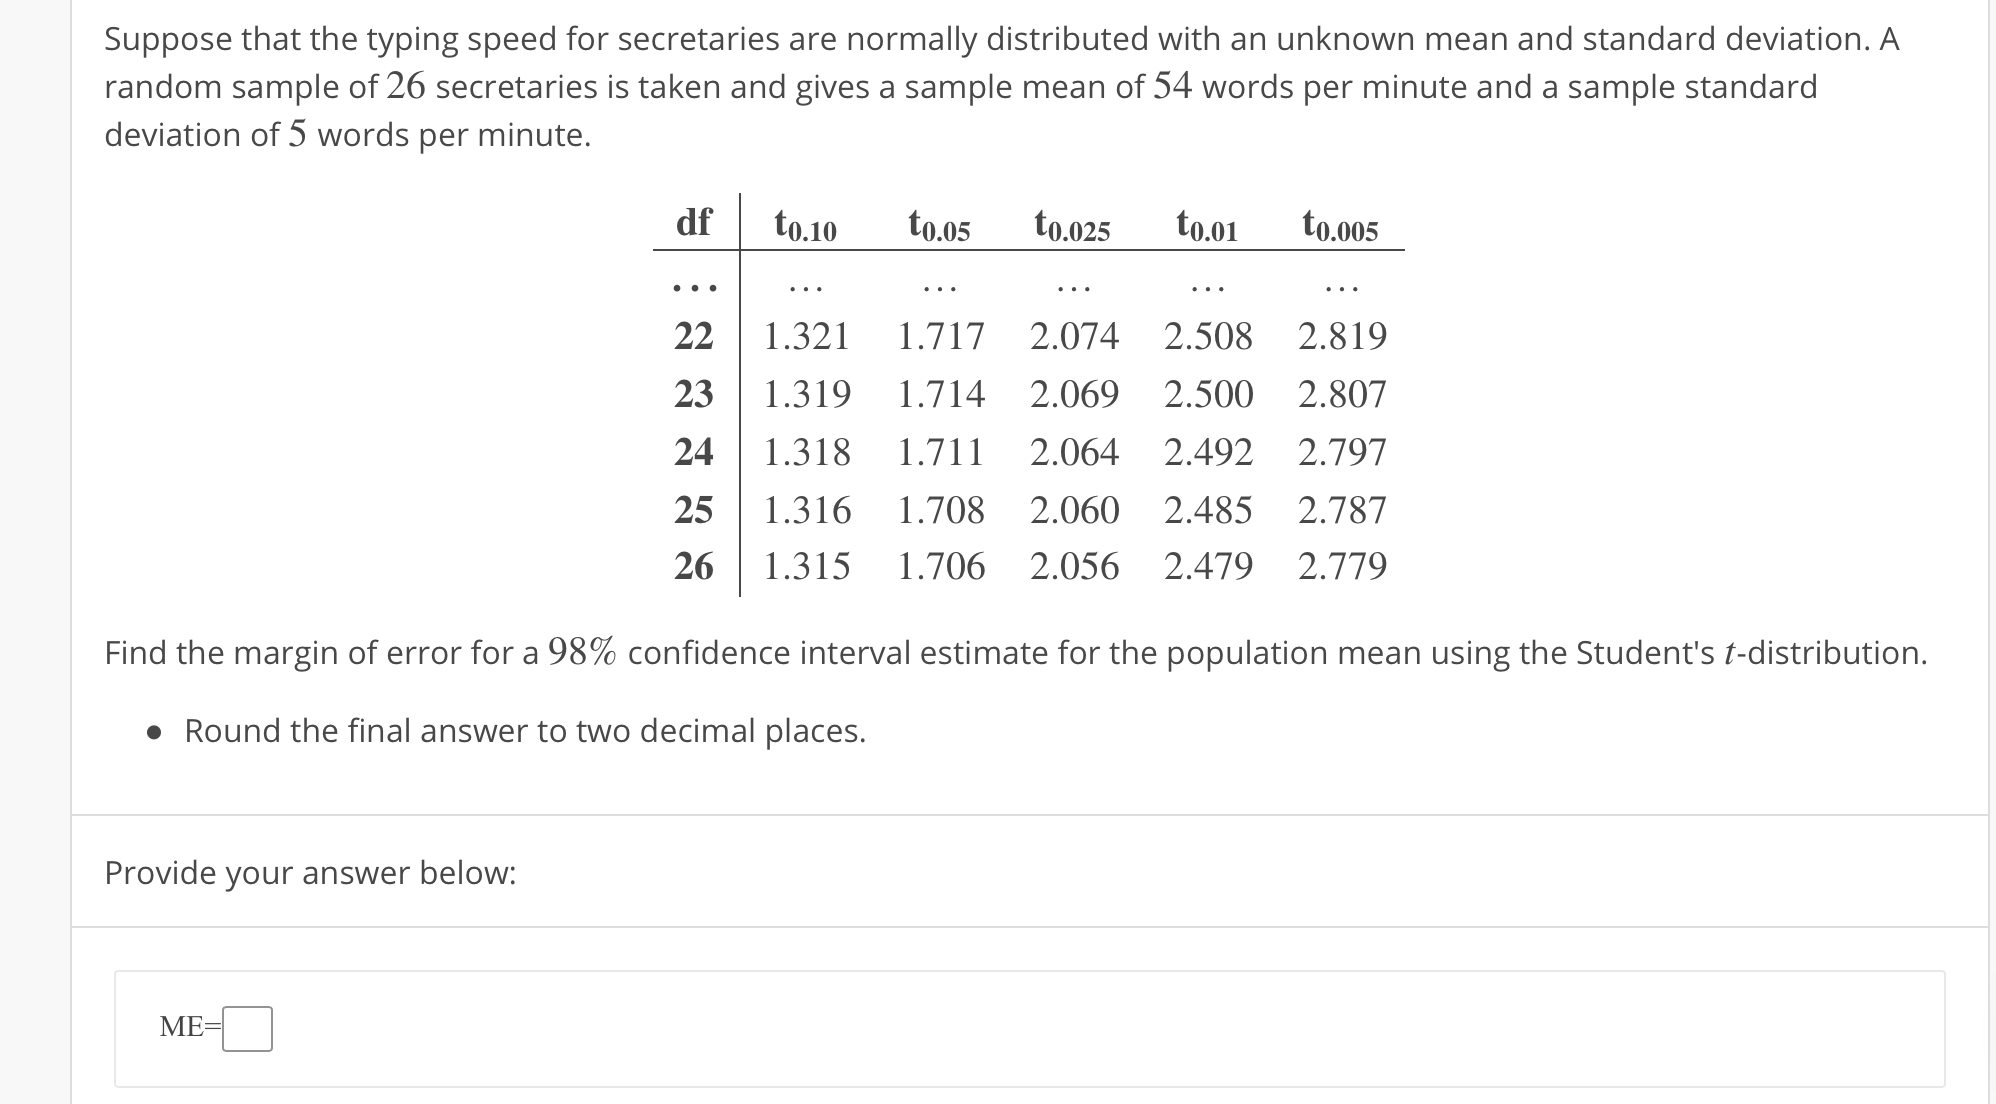 Suppose that the typing speed for secretaries are normally distributed with an unknown mean and standard deviation. A
random sample of 26 secretaries is taken and gives a sample mean of 54 words per minute and a sample standard
deviation of 5 words per minute.
df to.10.s t0.025 0.01to
to.o25 to.0 to.o05
22 1.321 1.717 2.074 2.508 2.819
23 1.319 1.714 2.069 2.500 2.807
24 1.318 1.711 2.064 2.492 2.797
25 1.316 1.708 2.060 2.485 2.787
26 1.315 1.706 2.056 2.479 2.779
Find the margin of error for a 98% confidence interval estimate for the population mean using the Student's t-distribution.
Round the final answer to two decimal places.
Provide your answer below:
ME
